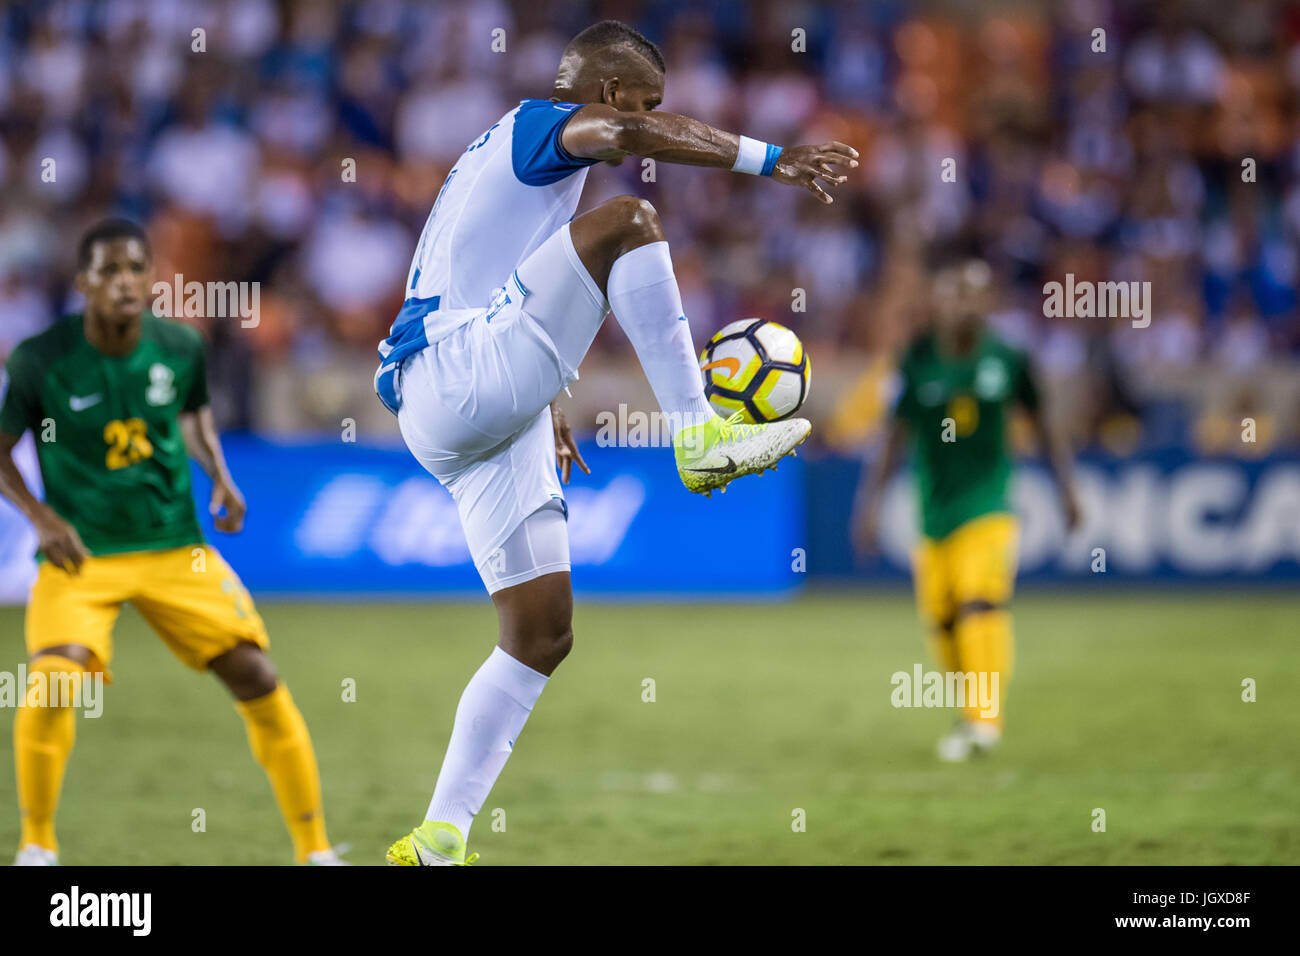 Houston, Texas, USA. 11th July, 2017. Honduras defender Brayan Beckeles (21) controls the ball during the 1st half of an international CONCACAF Gold Cup soccer match between Honduras and French Guiana at BBVA Compass Stadium in Houston, TX on July 11th, 2017. The game ended in a 0-0 draw. Credit: Trask Smith/ZUMA Wire/Alamy Live News Stock Photo